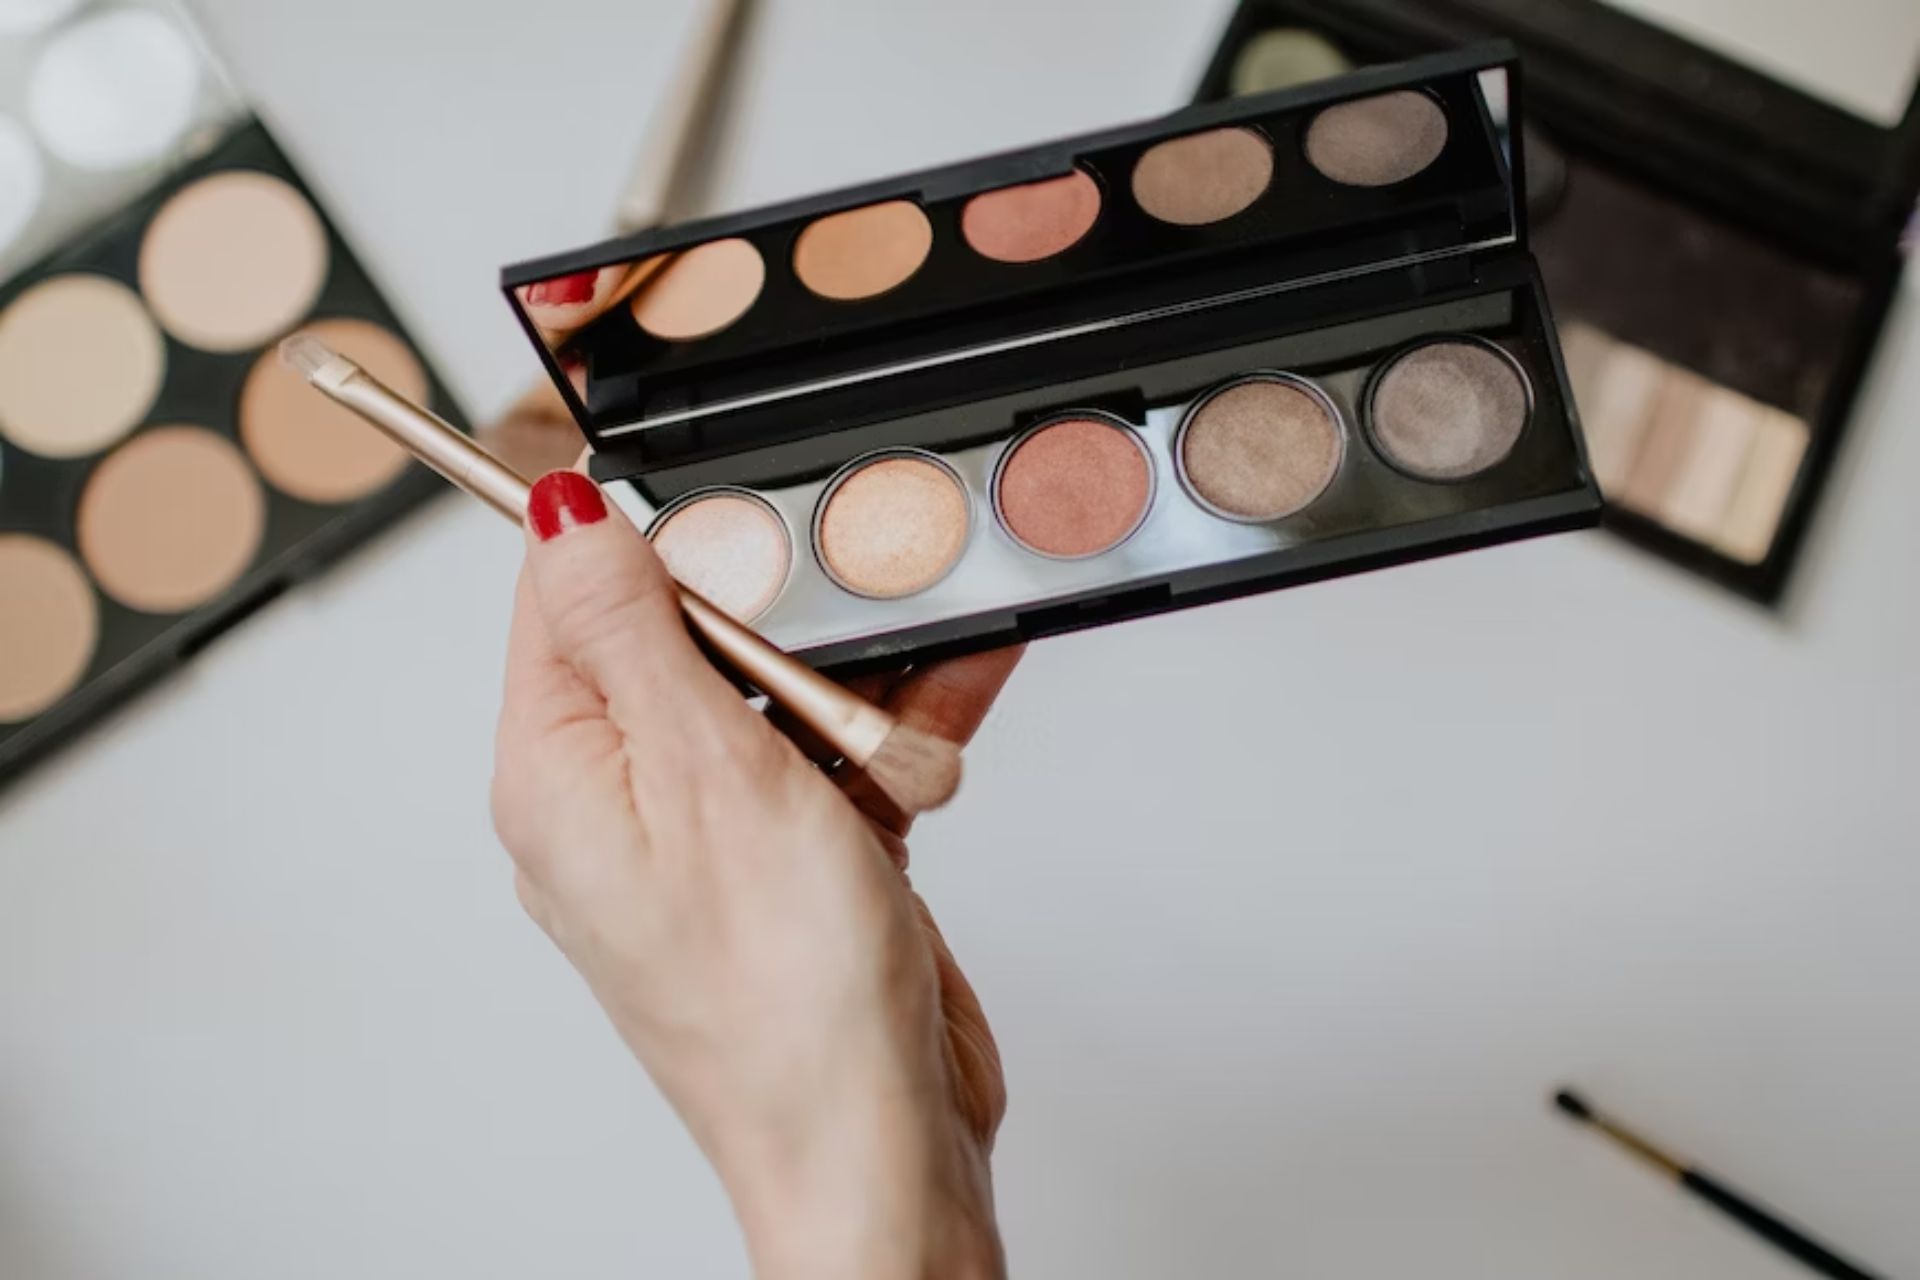 A person holds a neutral-colored eyeshadow palette with five colors. They range from light to dark. Learning how to do natural makeup involves learning which colors work best to leave you looking like you have little makeup on at all.